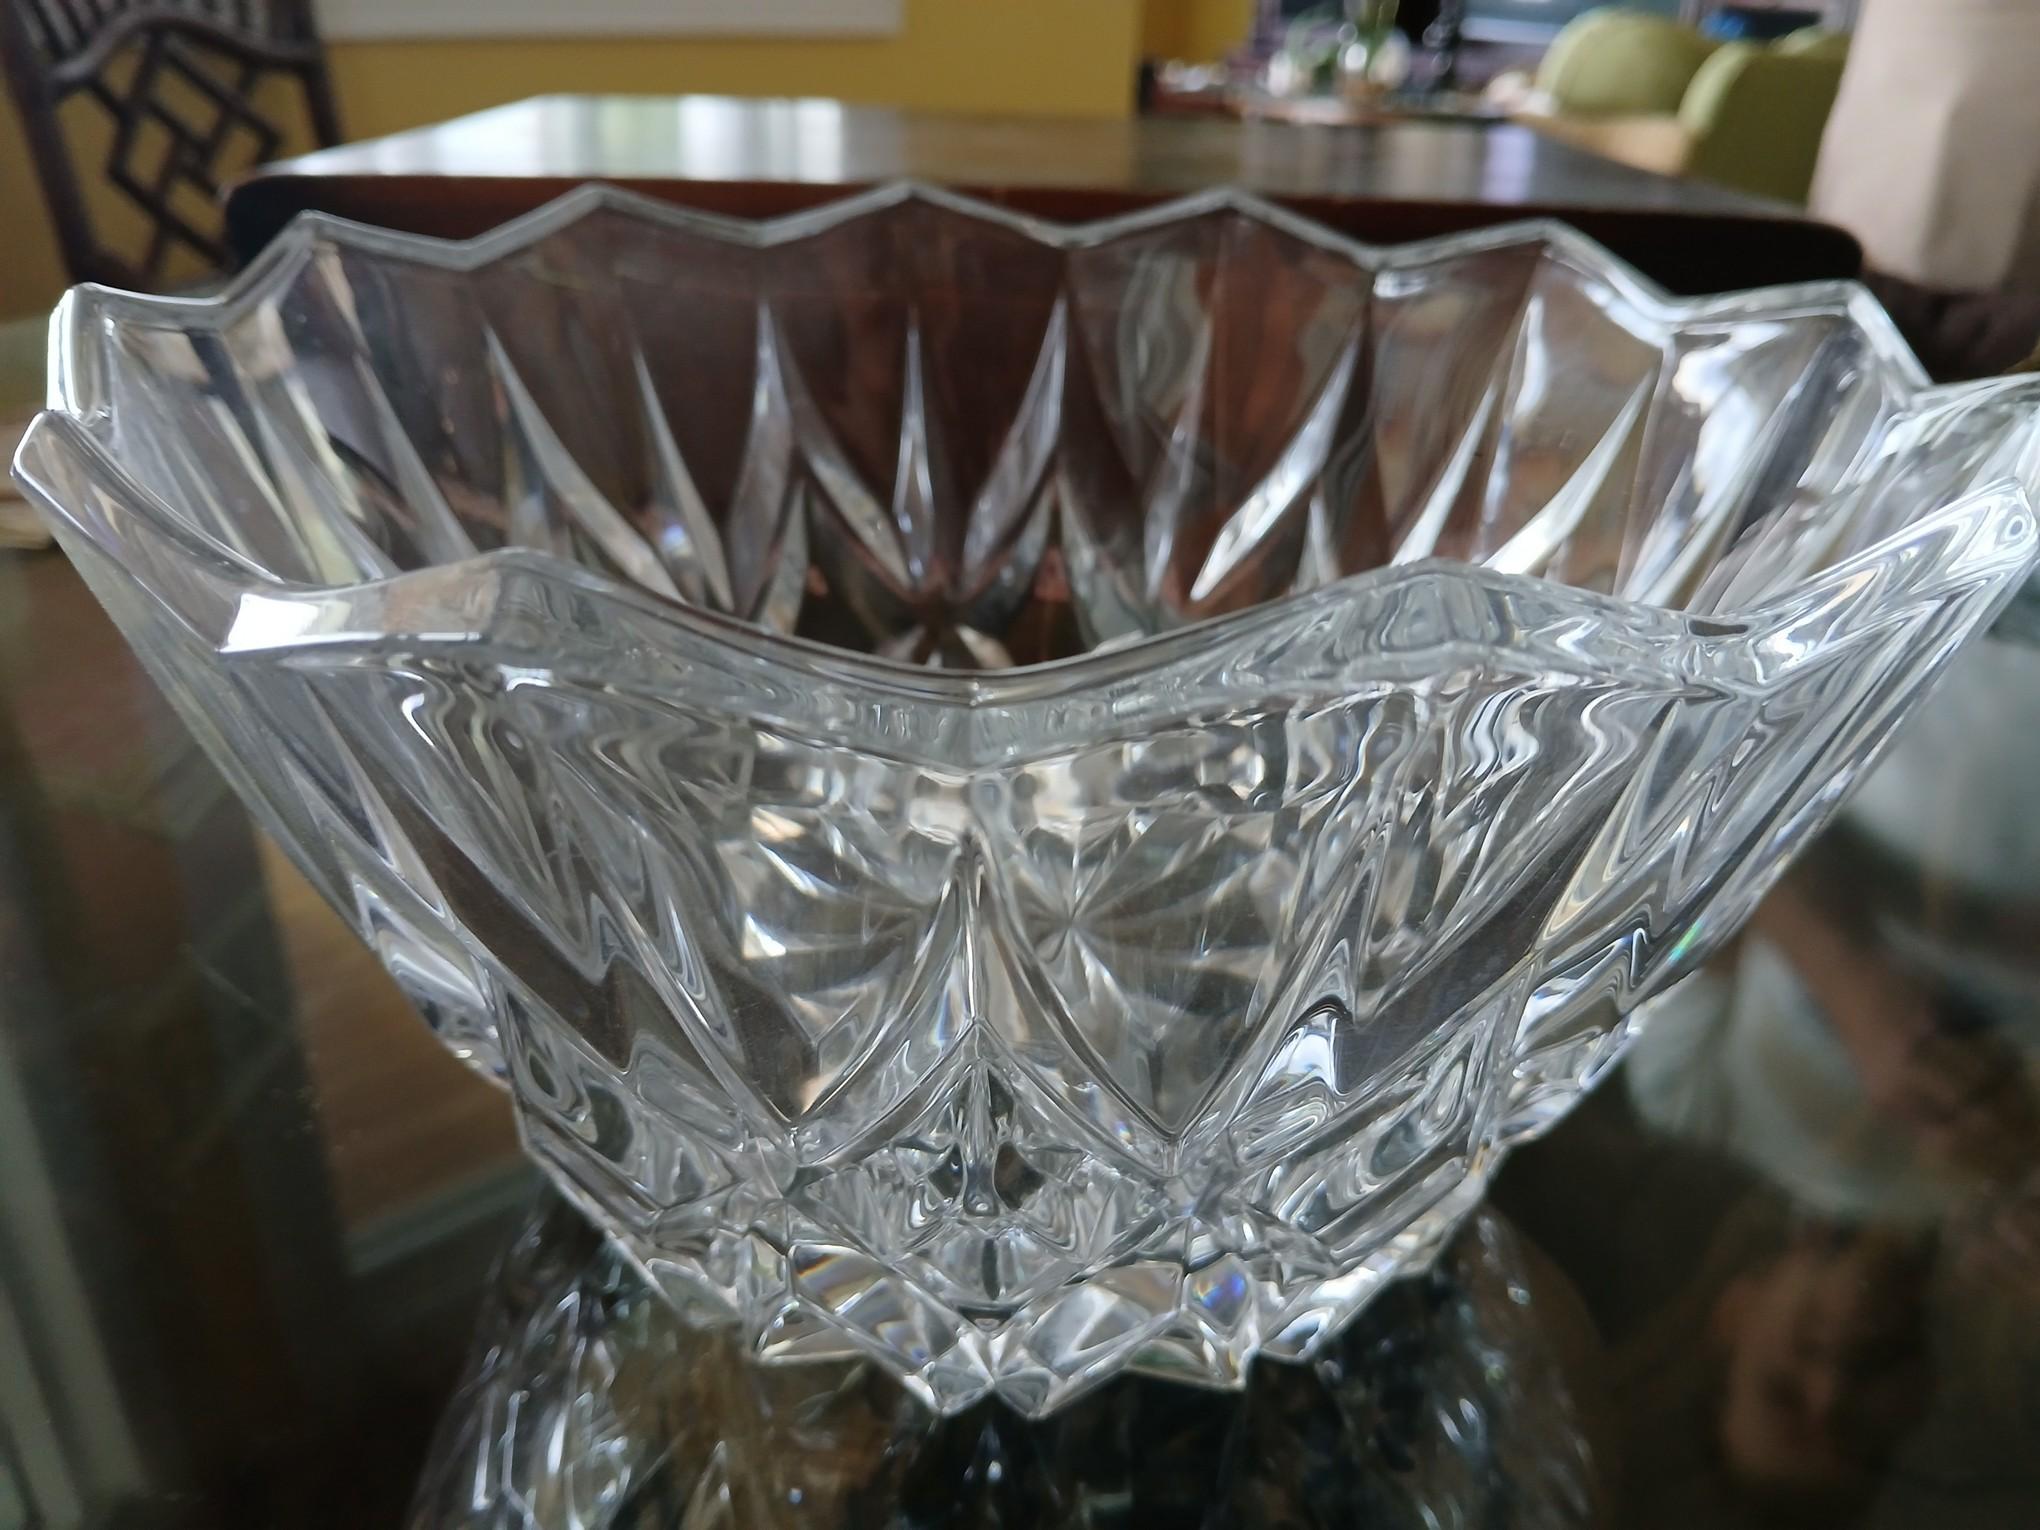 10"  Round by 7" Deep Crystal Serving Bowl / Serving Dish